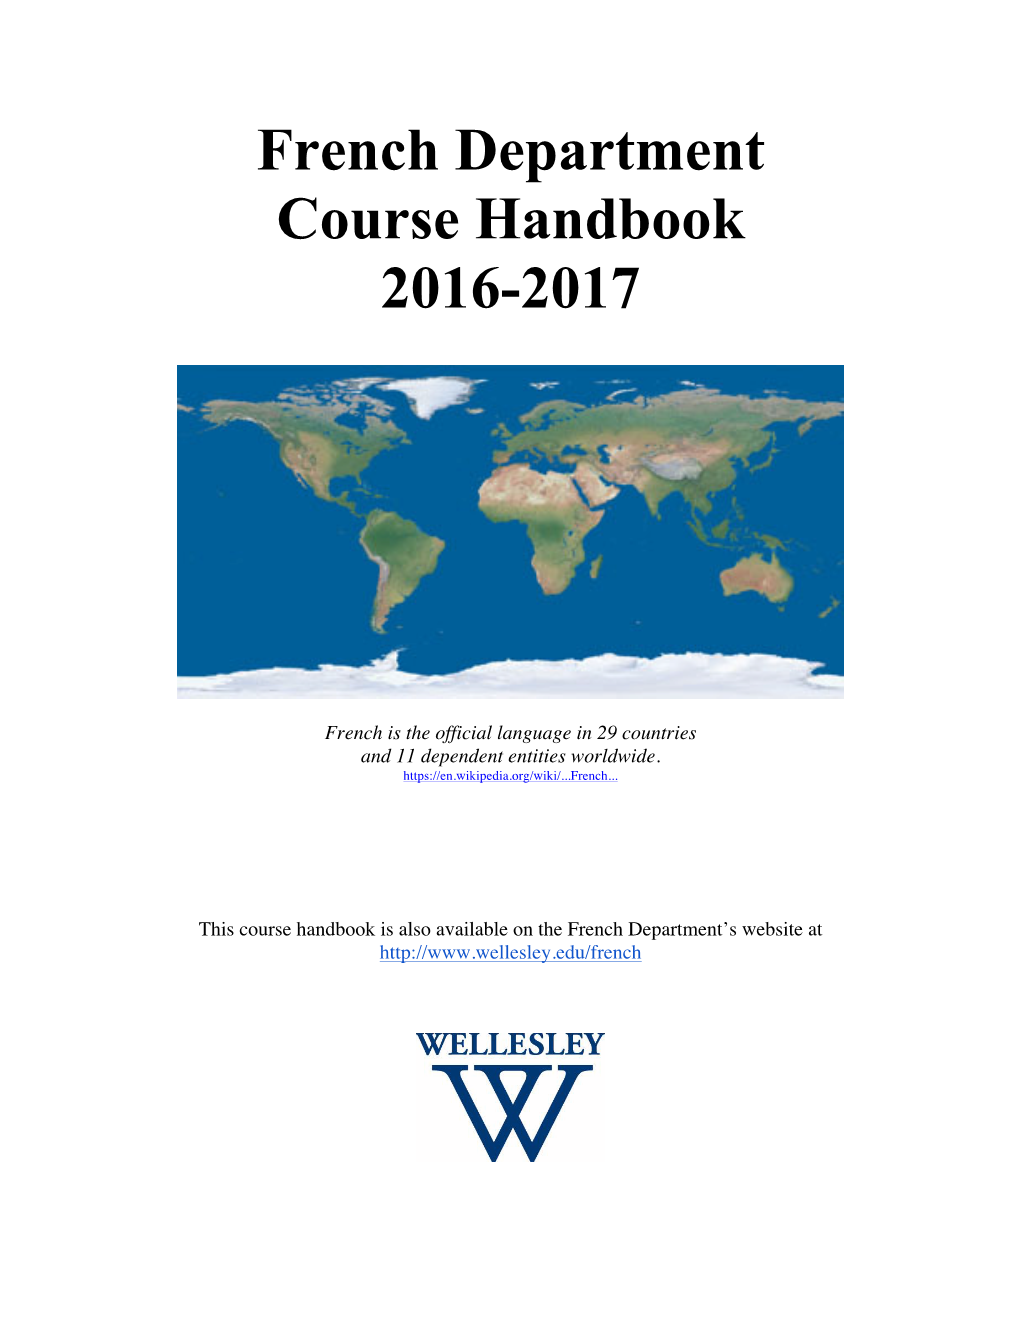 French Department Course Handbook 2016-2017